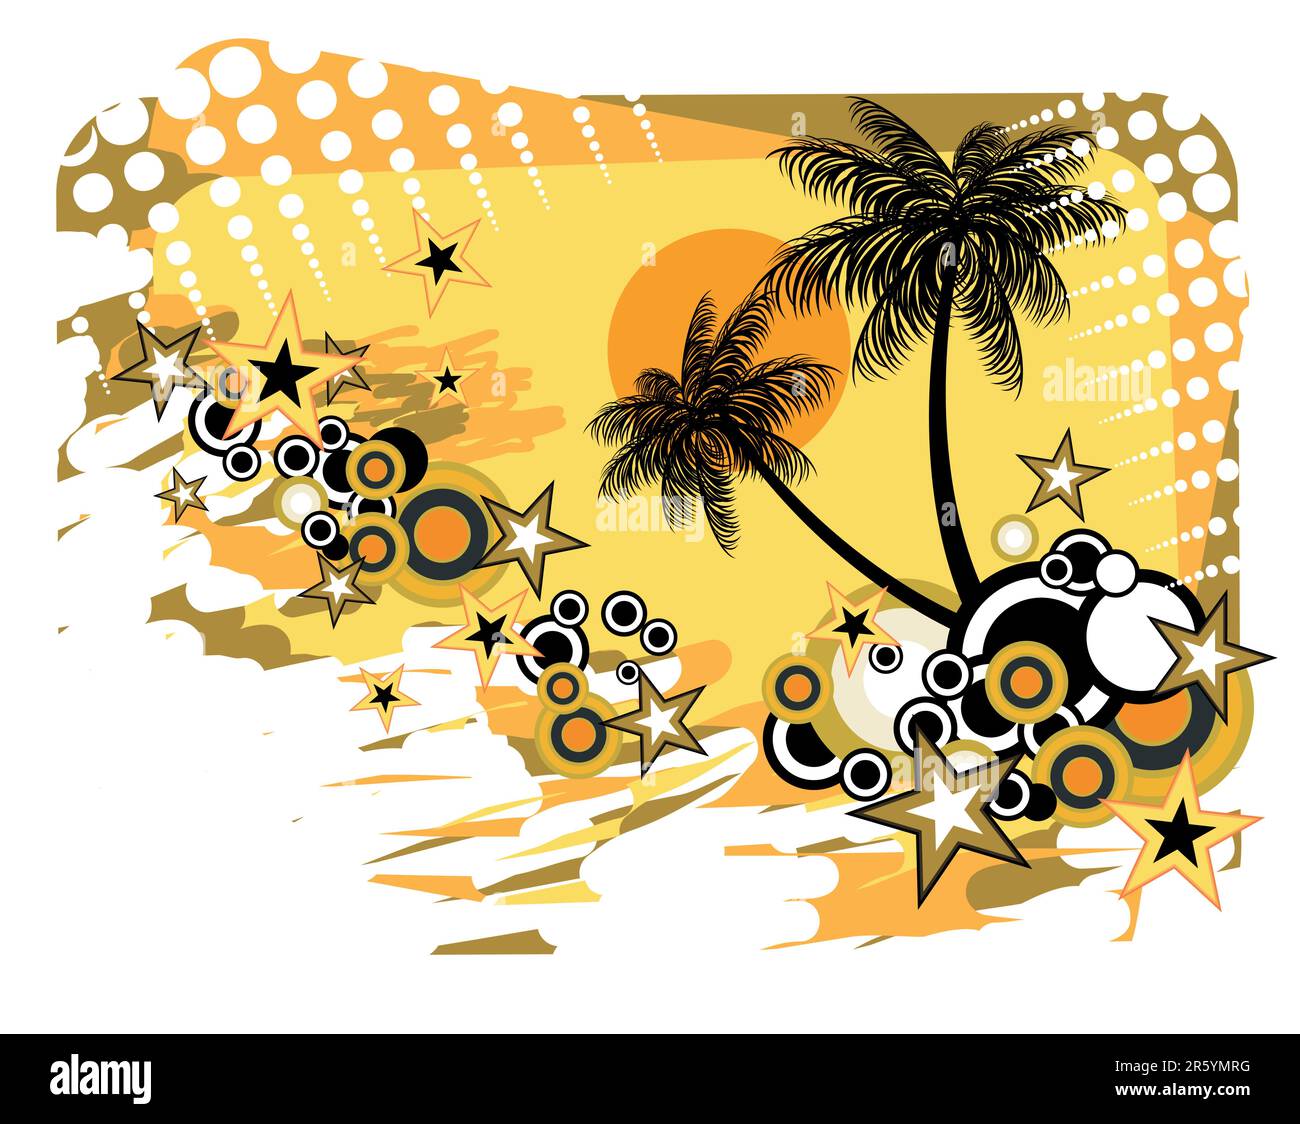 Disco dance tropical music flyer Royalty Free Vector Image